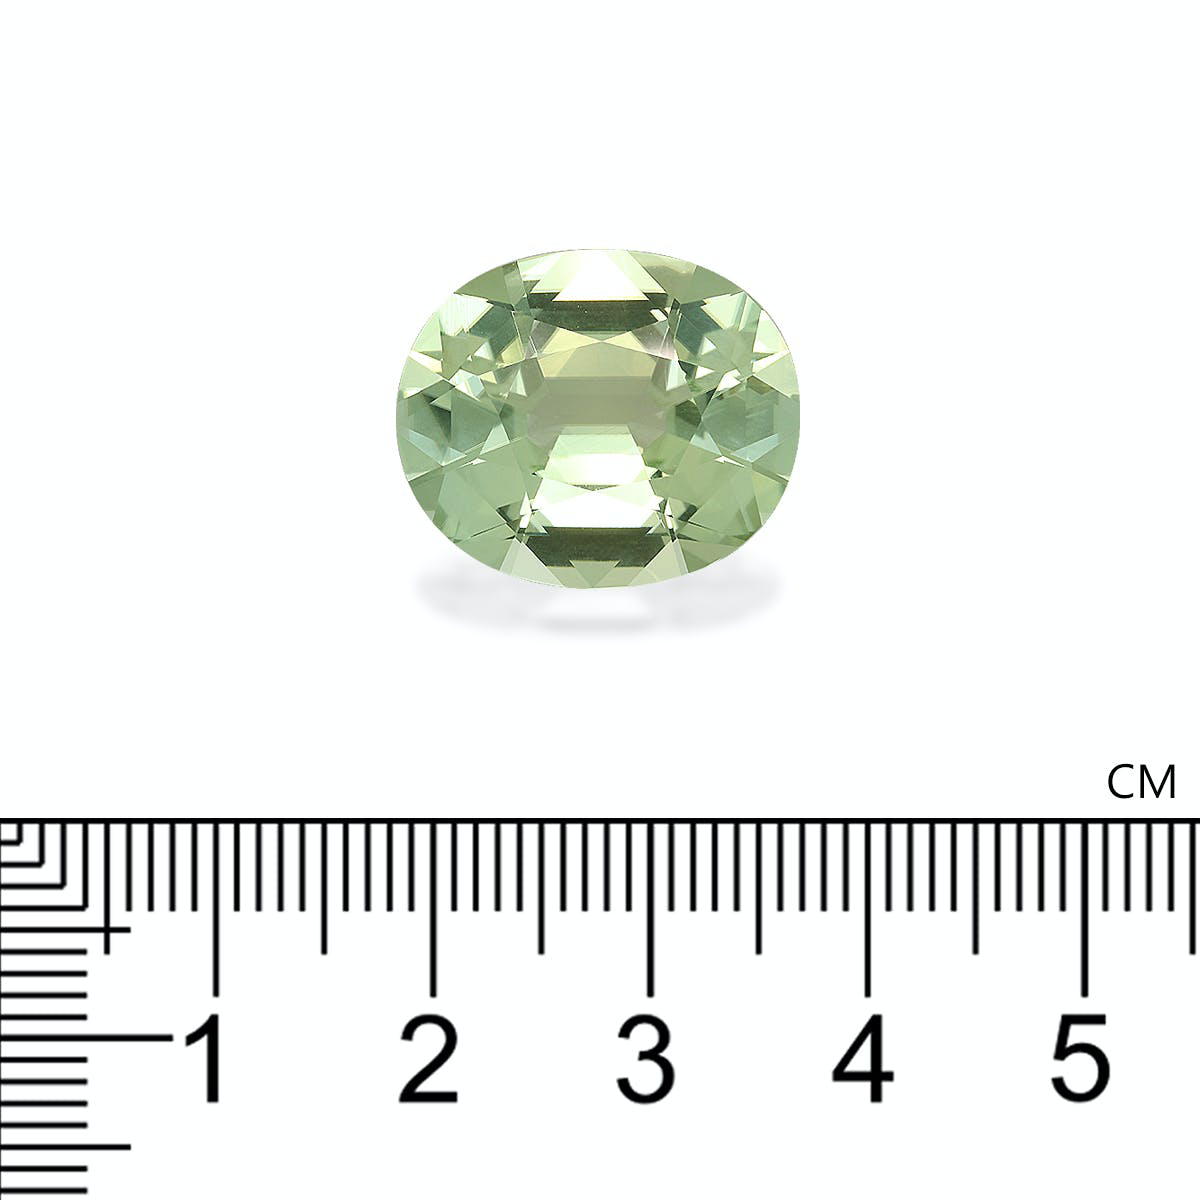 Picture of Green Tourmaline 14.88ct (TG0473)